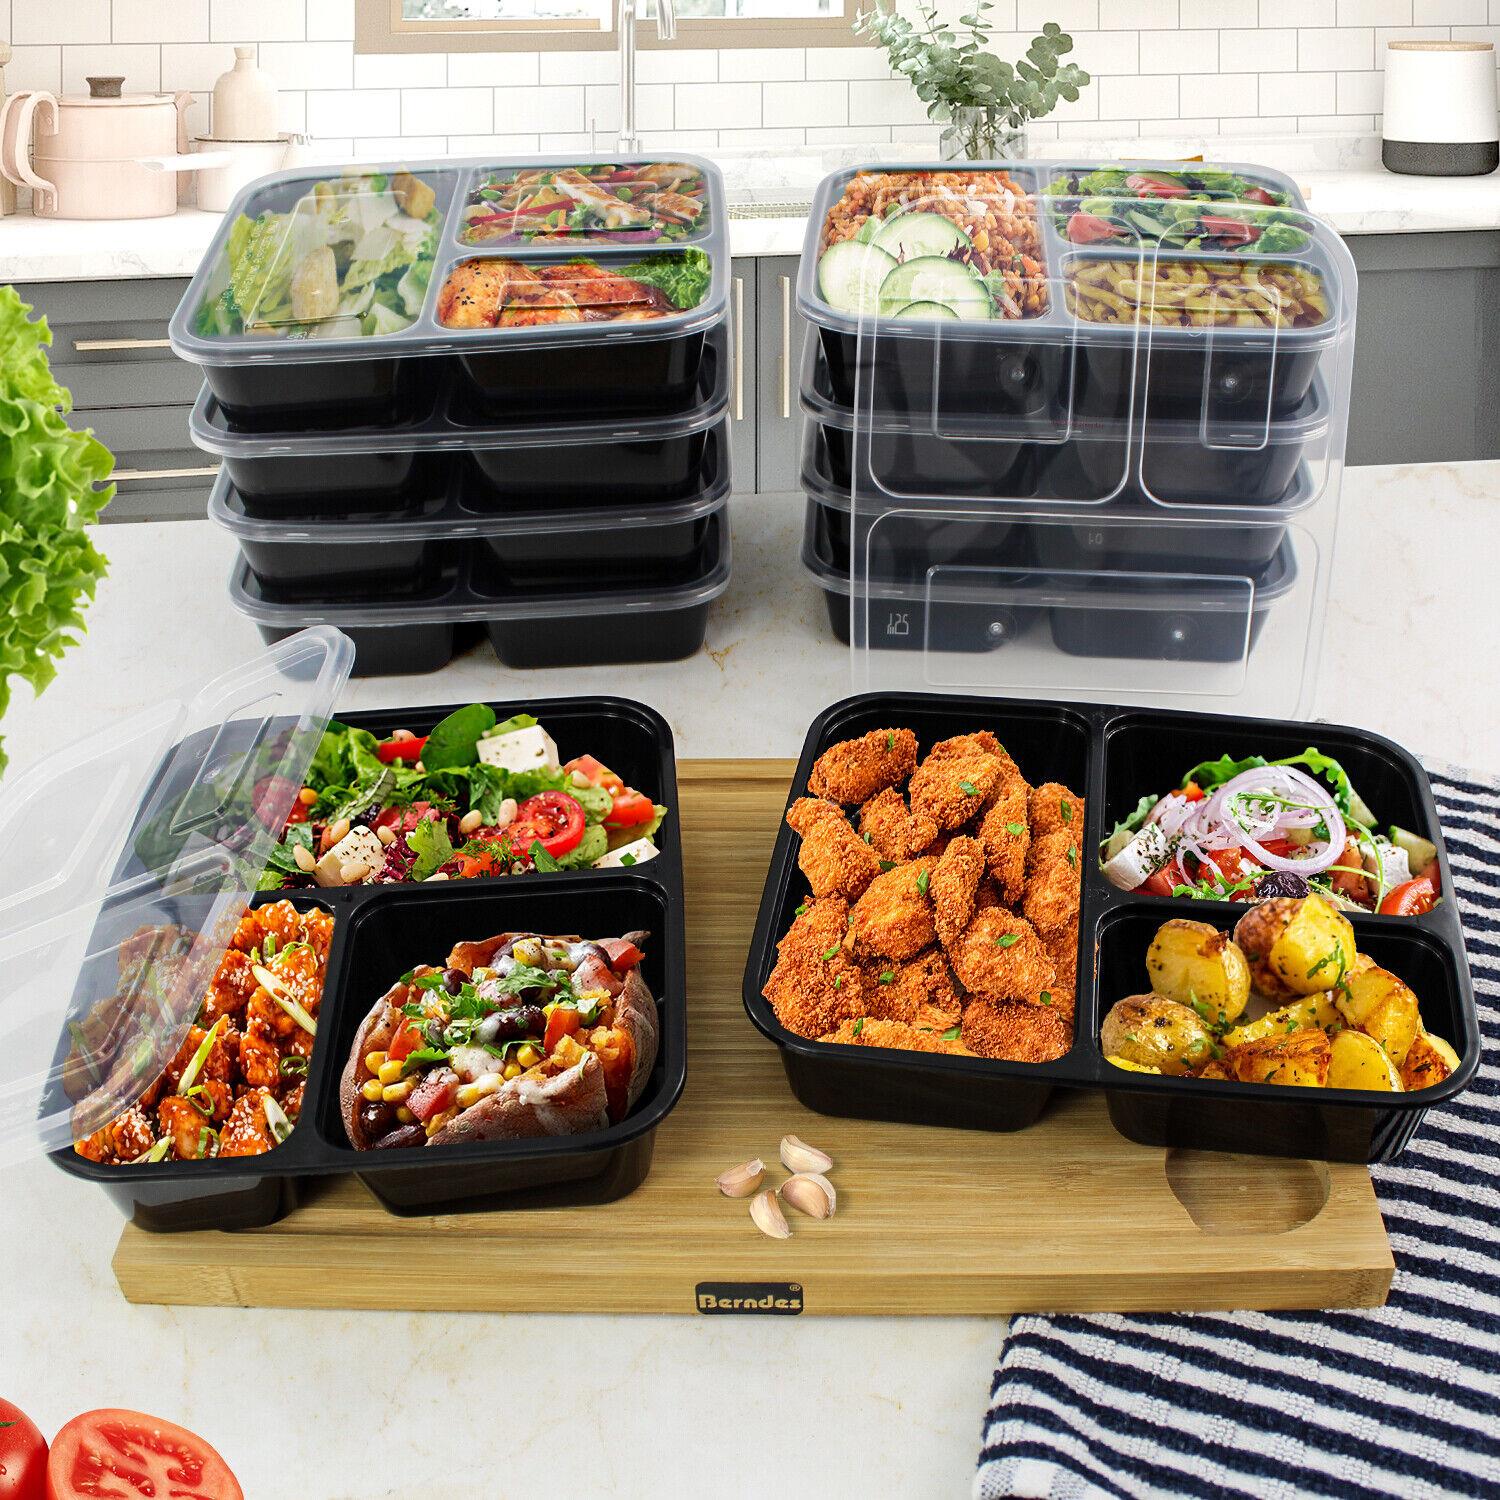 Geezy Food Container Set of 10 Meal Prep Food Storage with 3 Compartments